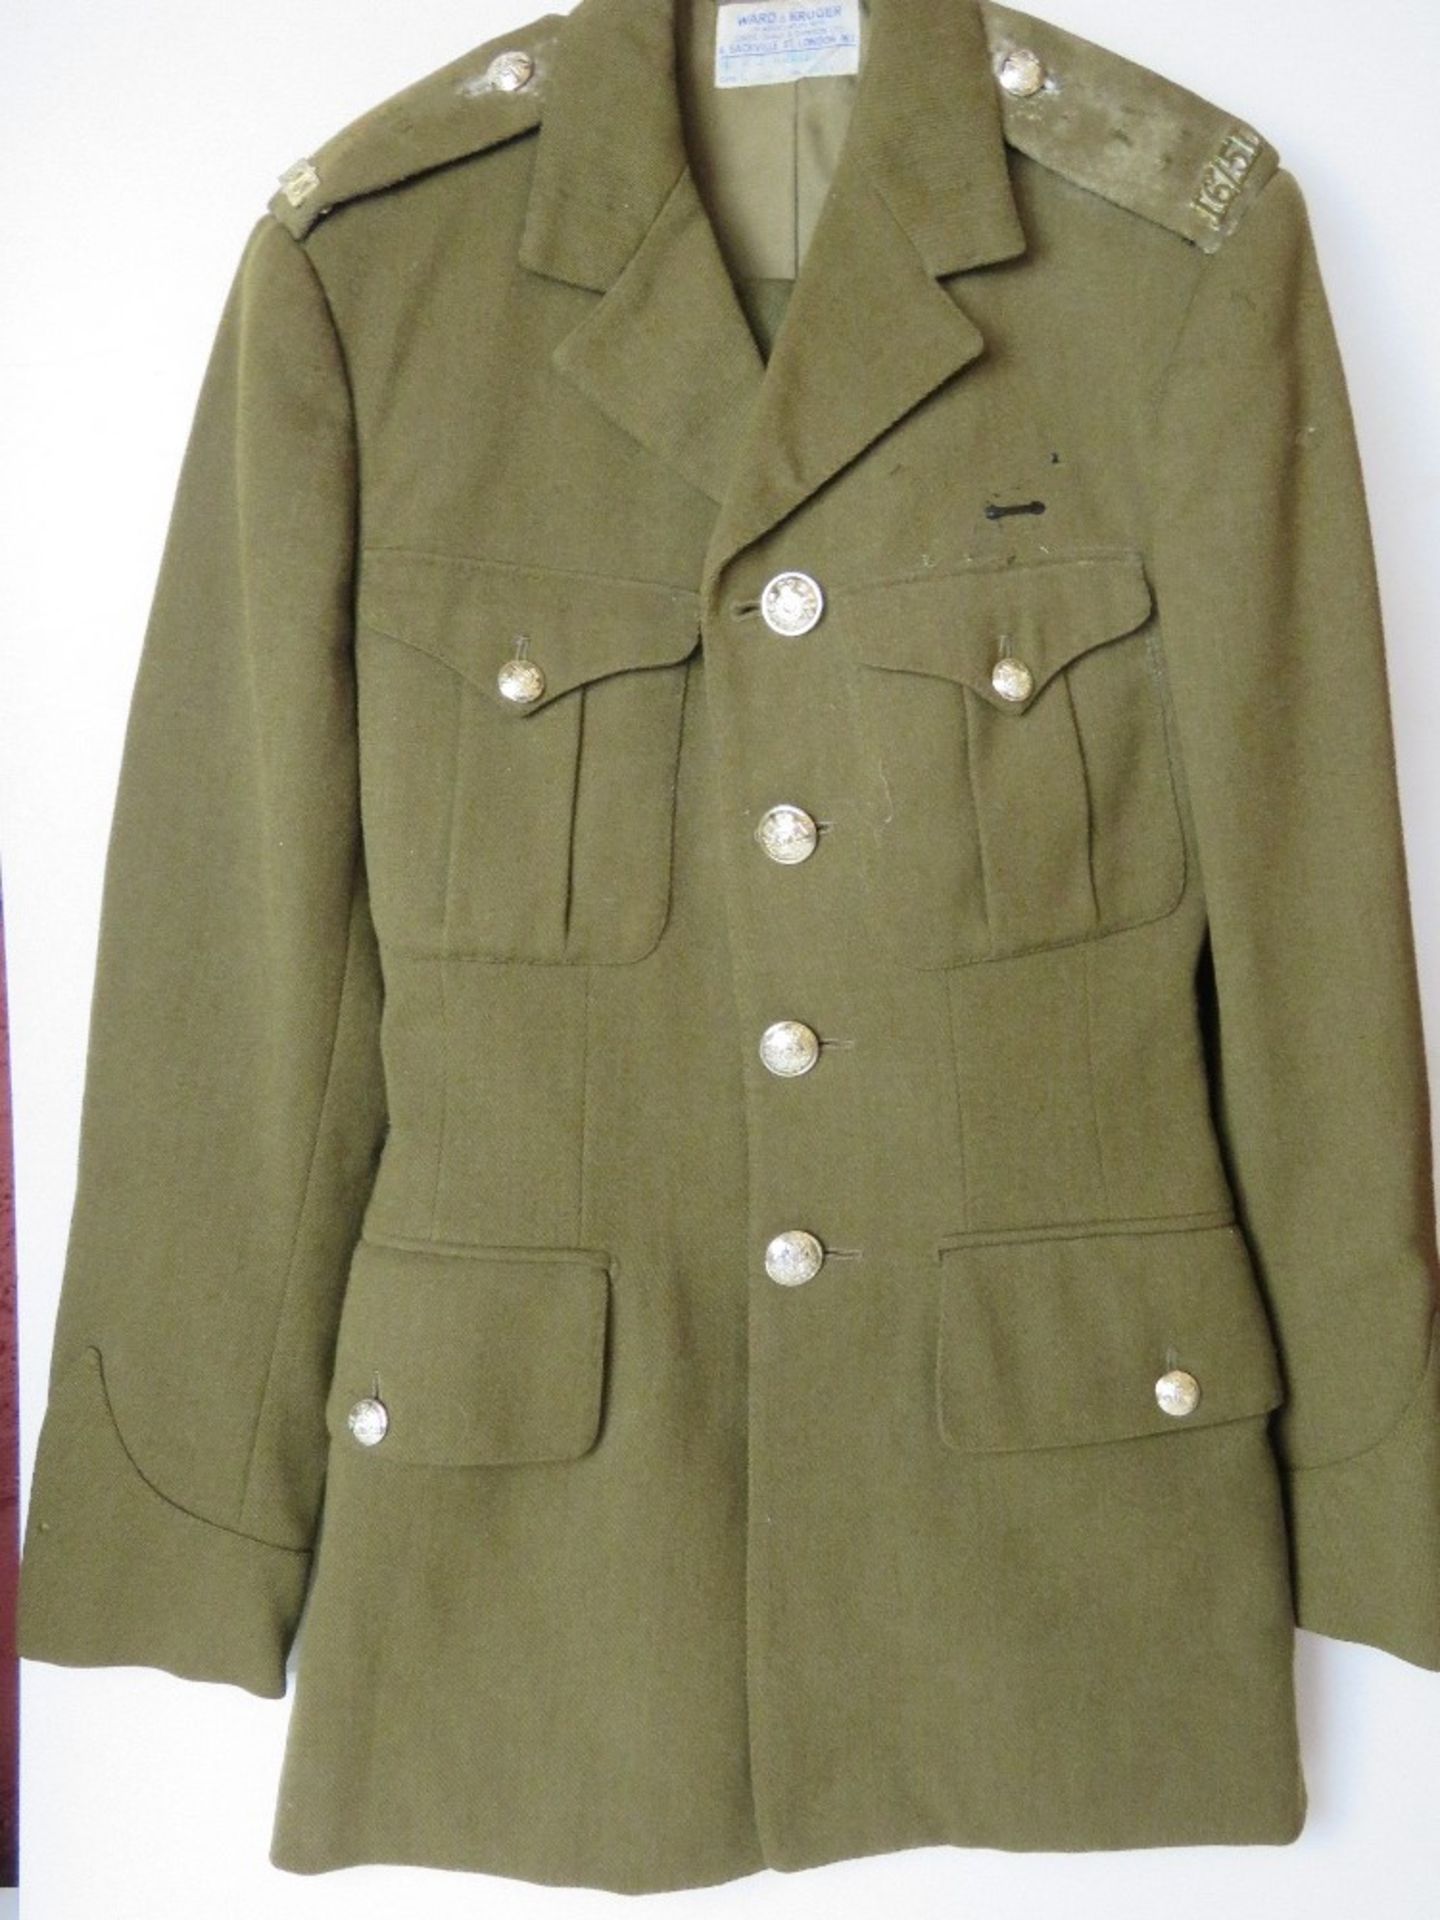 A British Army No 2 dress tunic and trousers, having epaulette badges upon,